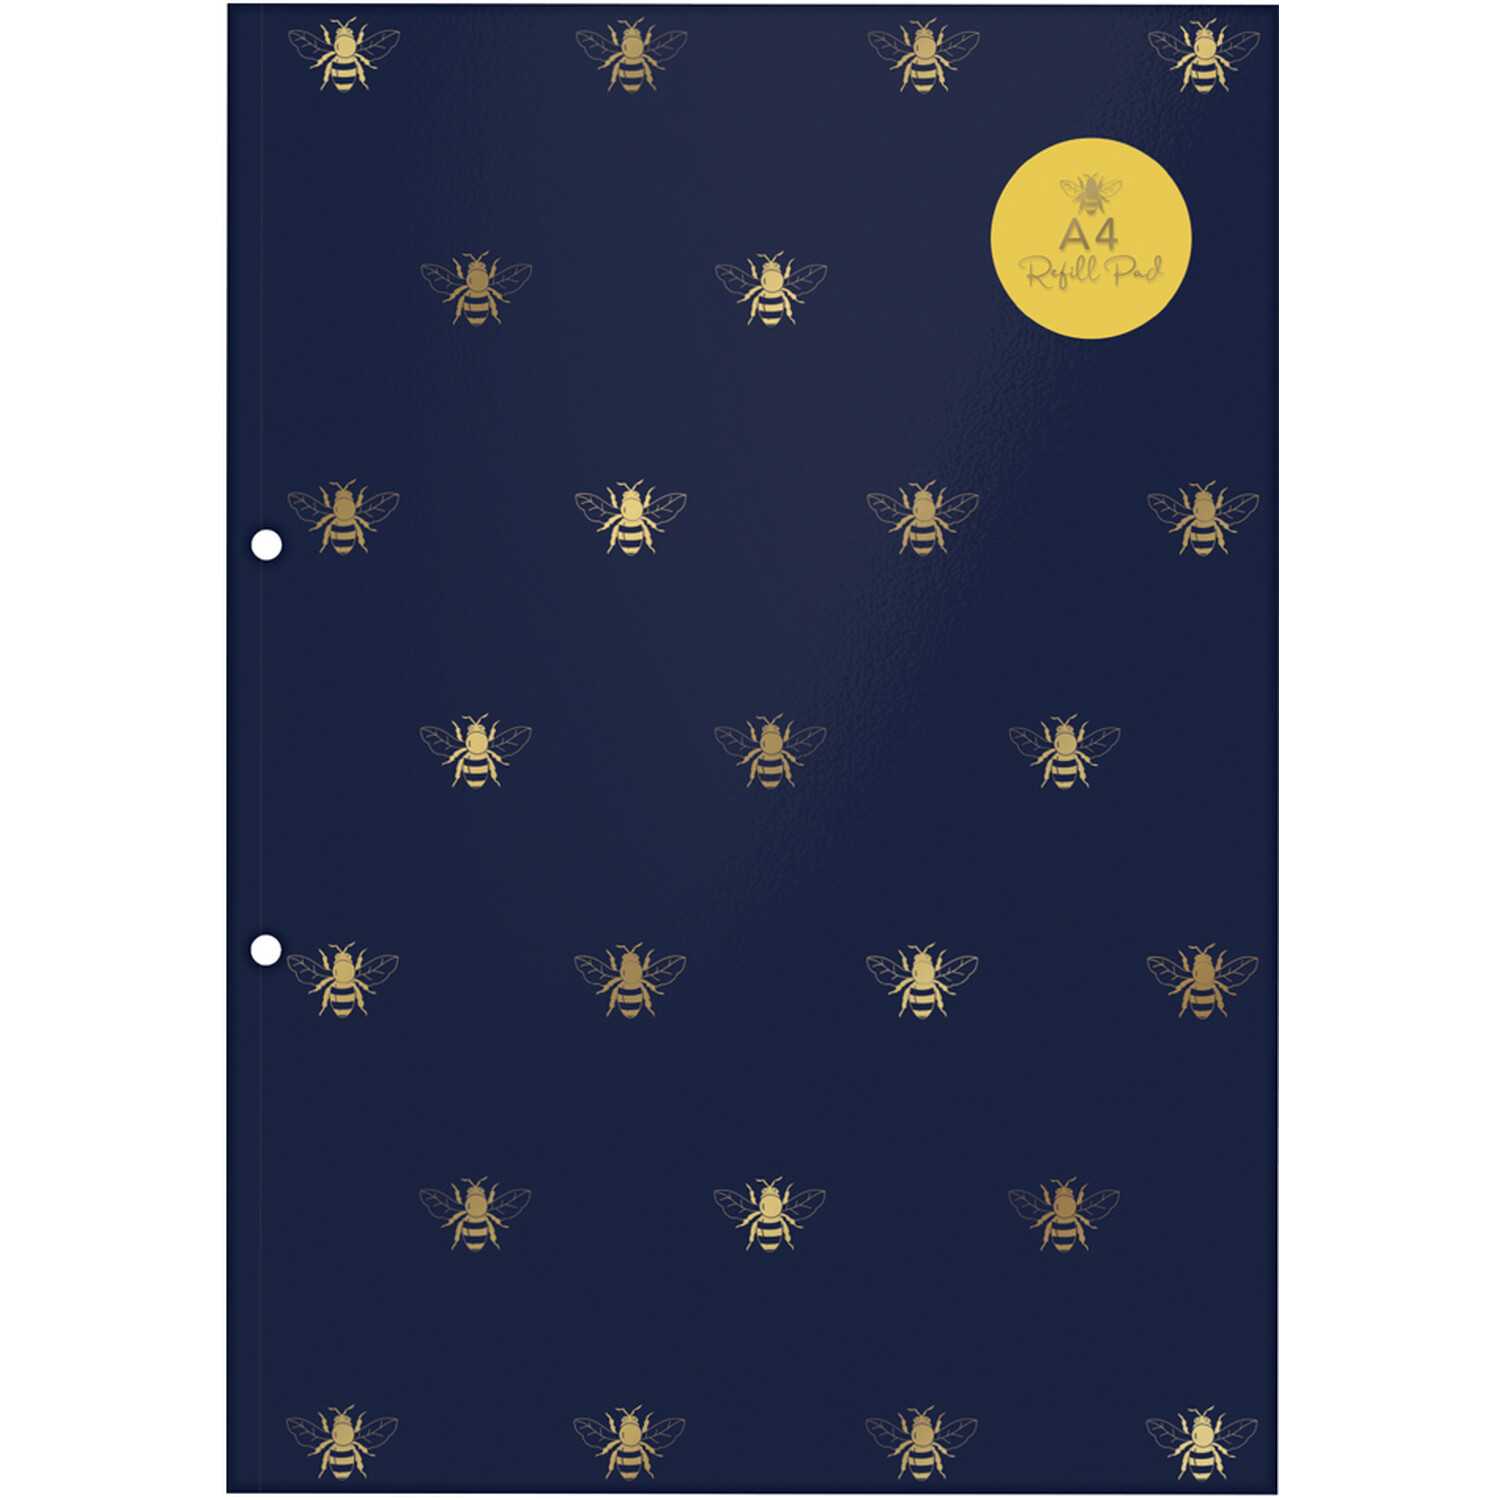 A4 Navy Busy Bee Refill Pad Image